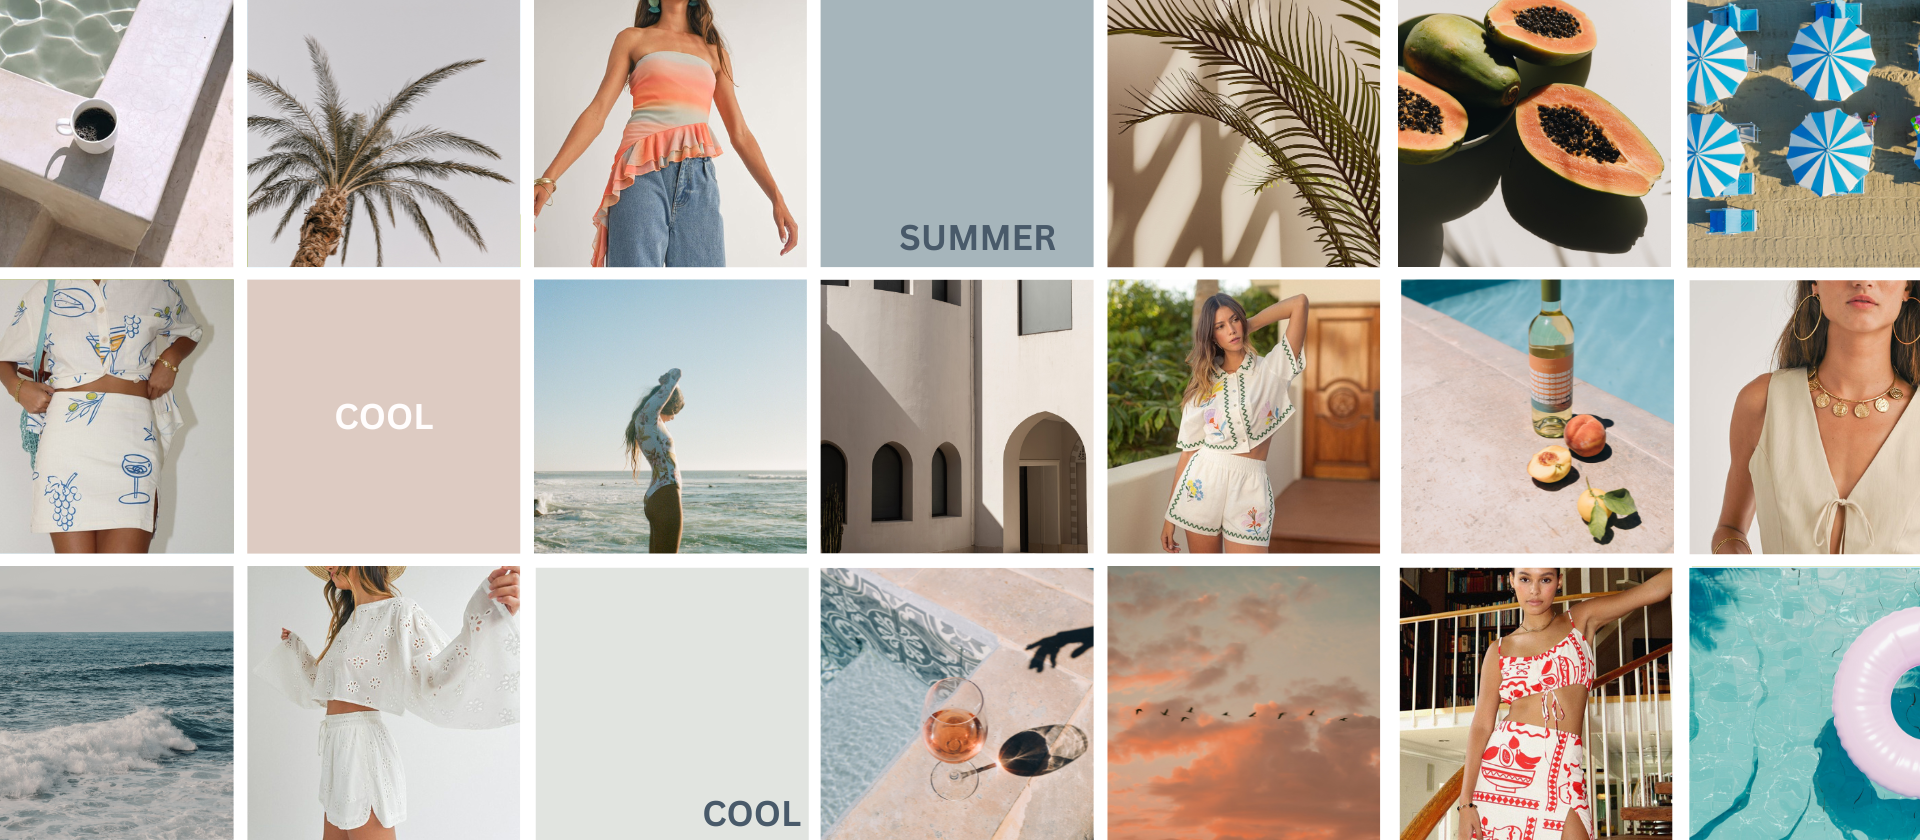 Pastel Aesthetic Summer Beach Collage Inspiration Instagram Story-3